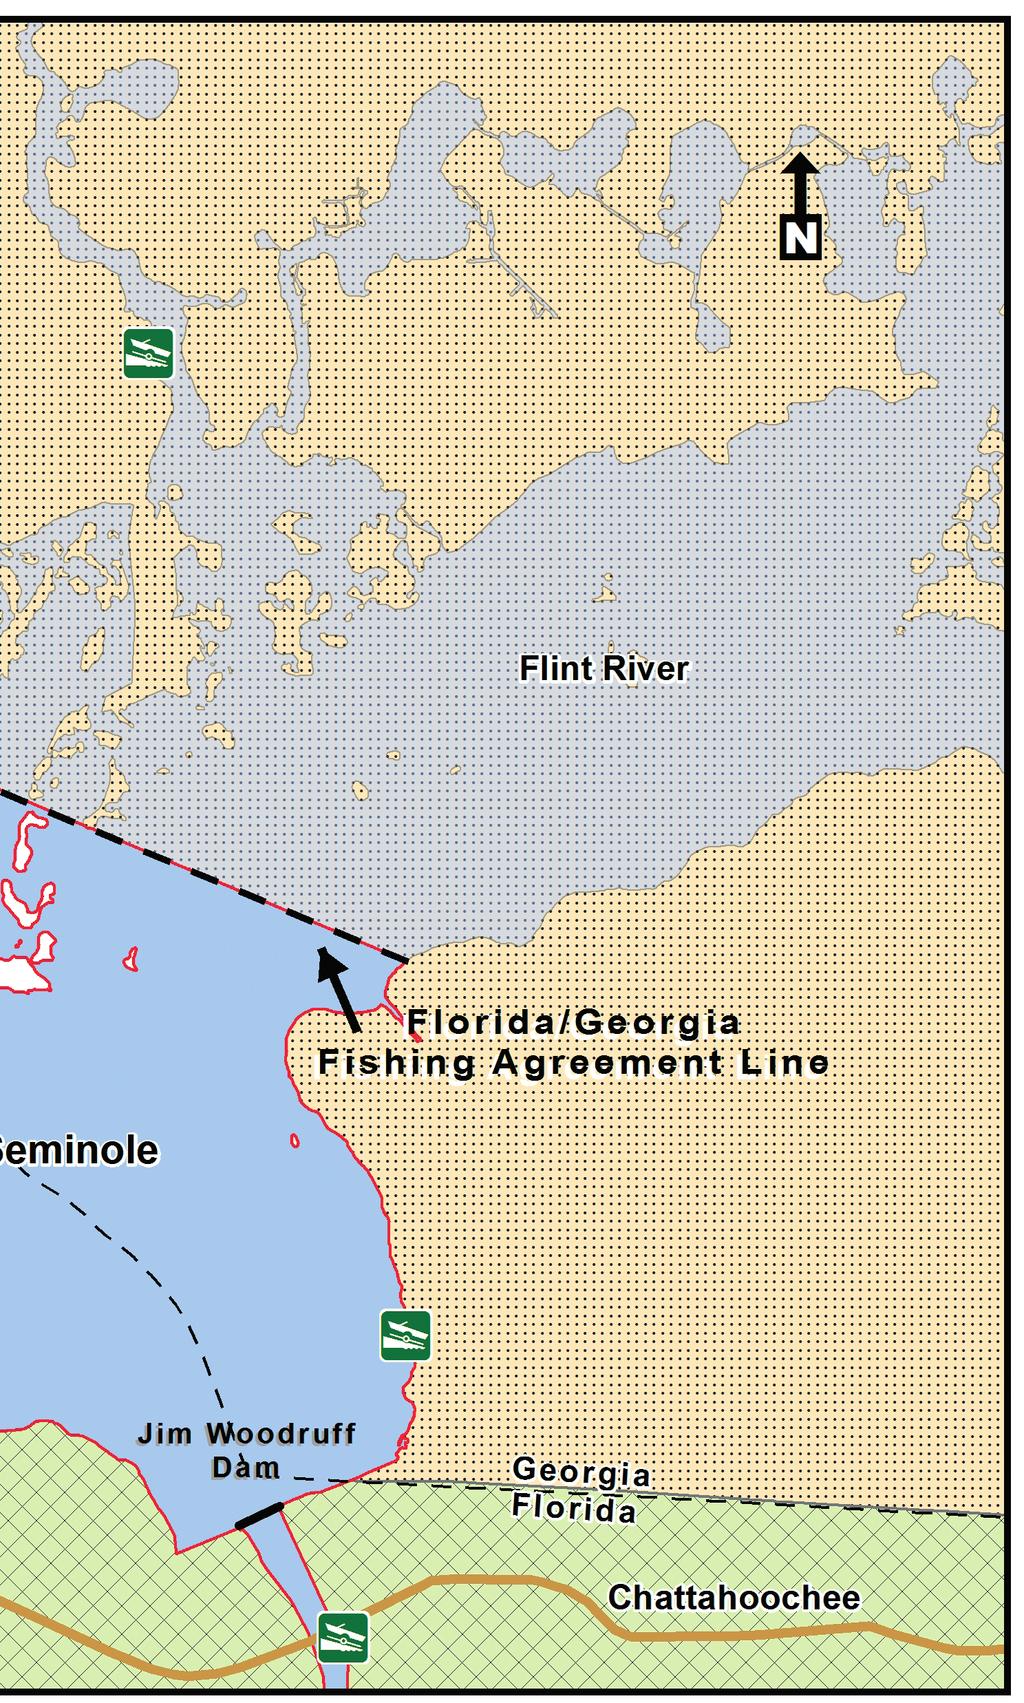 Map showing boundaries of Lake Seminole where agreement between Florida and Georgia and special regulations apply.